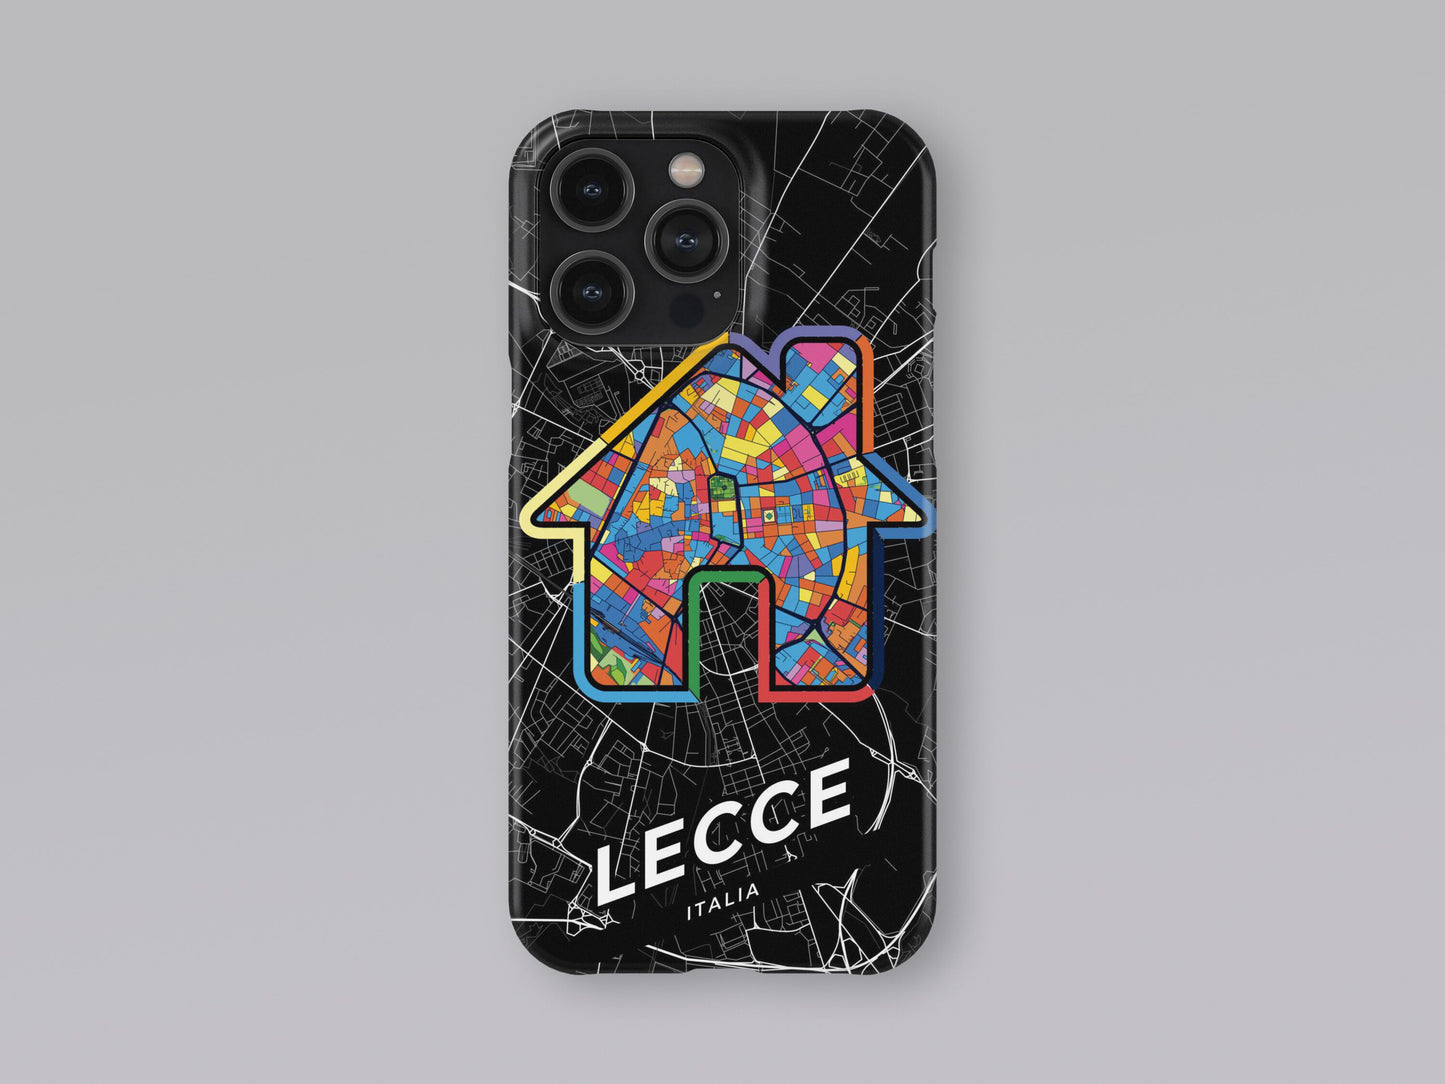 Lecce Italy slim phone case with colorful icon. Birthday, wedding or housewarming gift. Couple match cases. 3